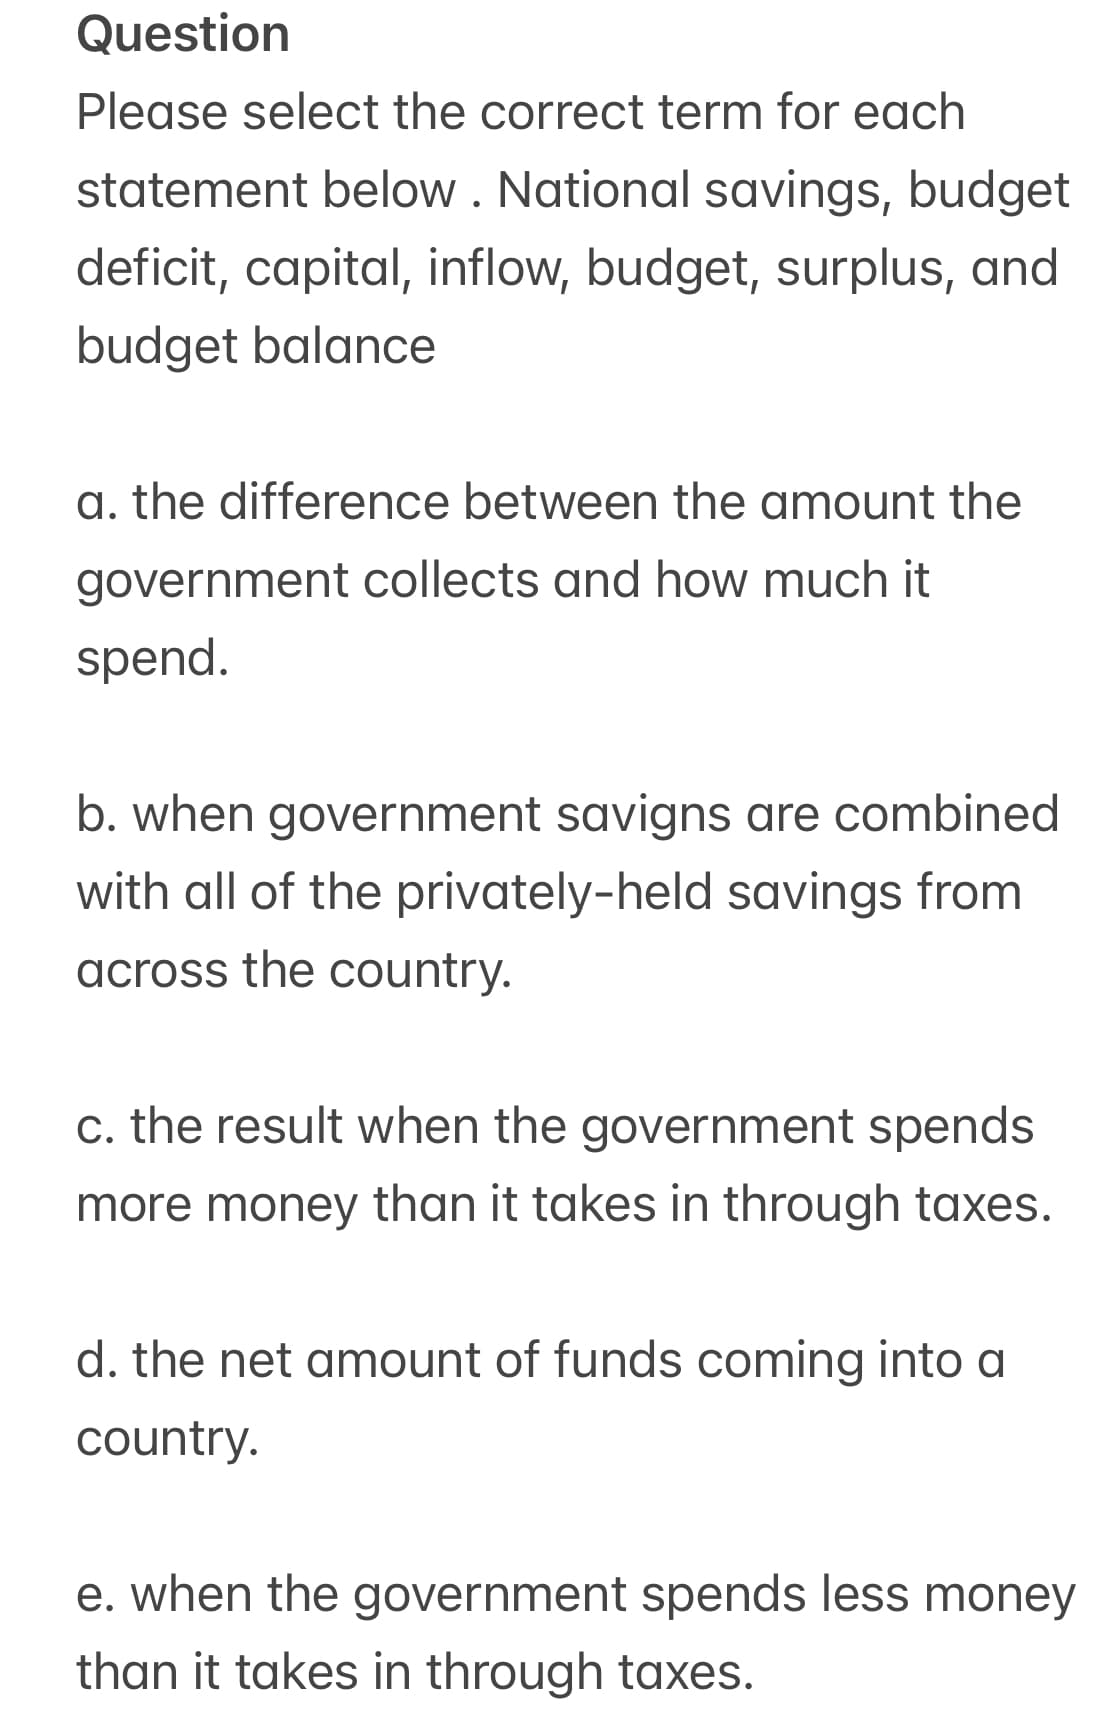 Question
Please select the correct term for each
statement below. National savings, budget
deficit, capital, inflow, budget, surplus, and
budget balance
a. the difference between the amount the
government collects and how much it
spend.
b. when government savigns are combined
with all of the privately-held savings from
across the country.
c. the result when the government spends
more money than it takes in through taxes.
d. the net amount of funds coming into a
country.
e. when the government spends less money
than it takes in through taxes.